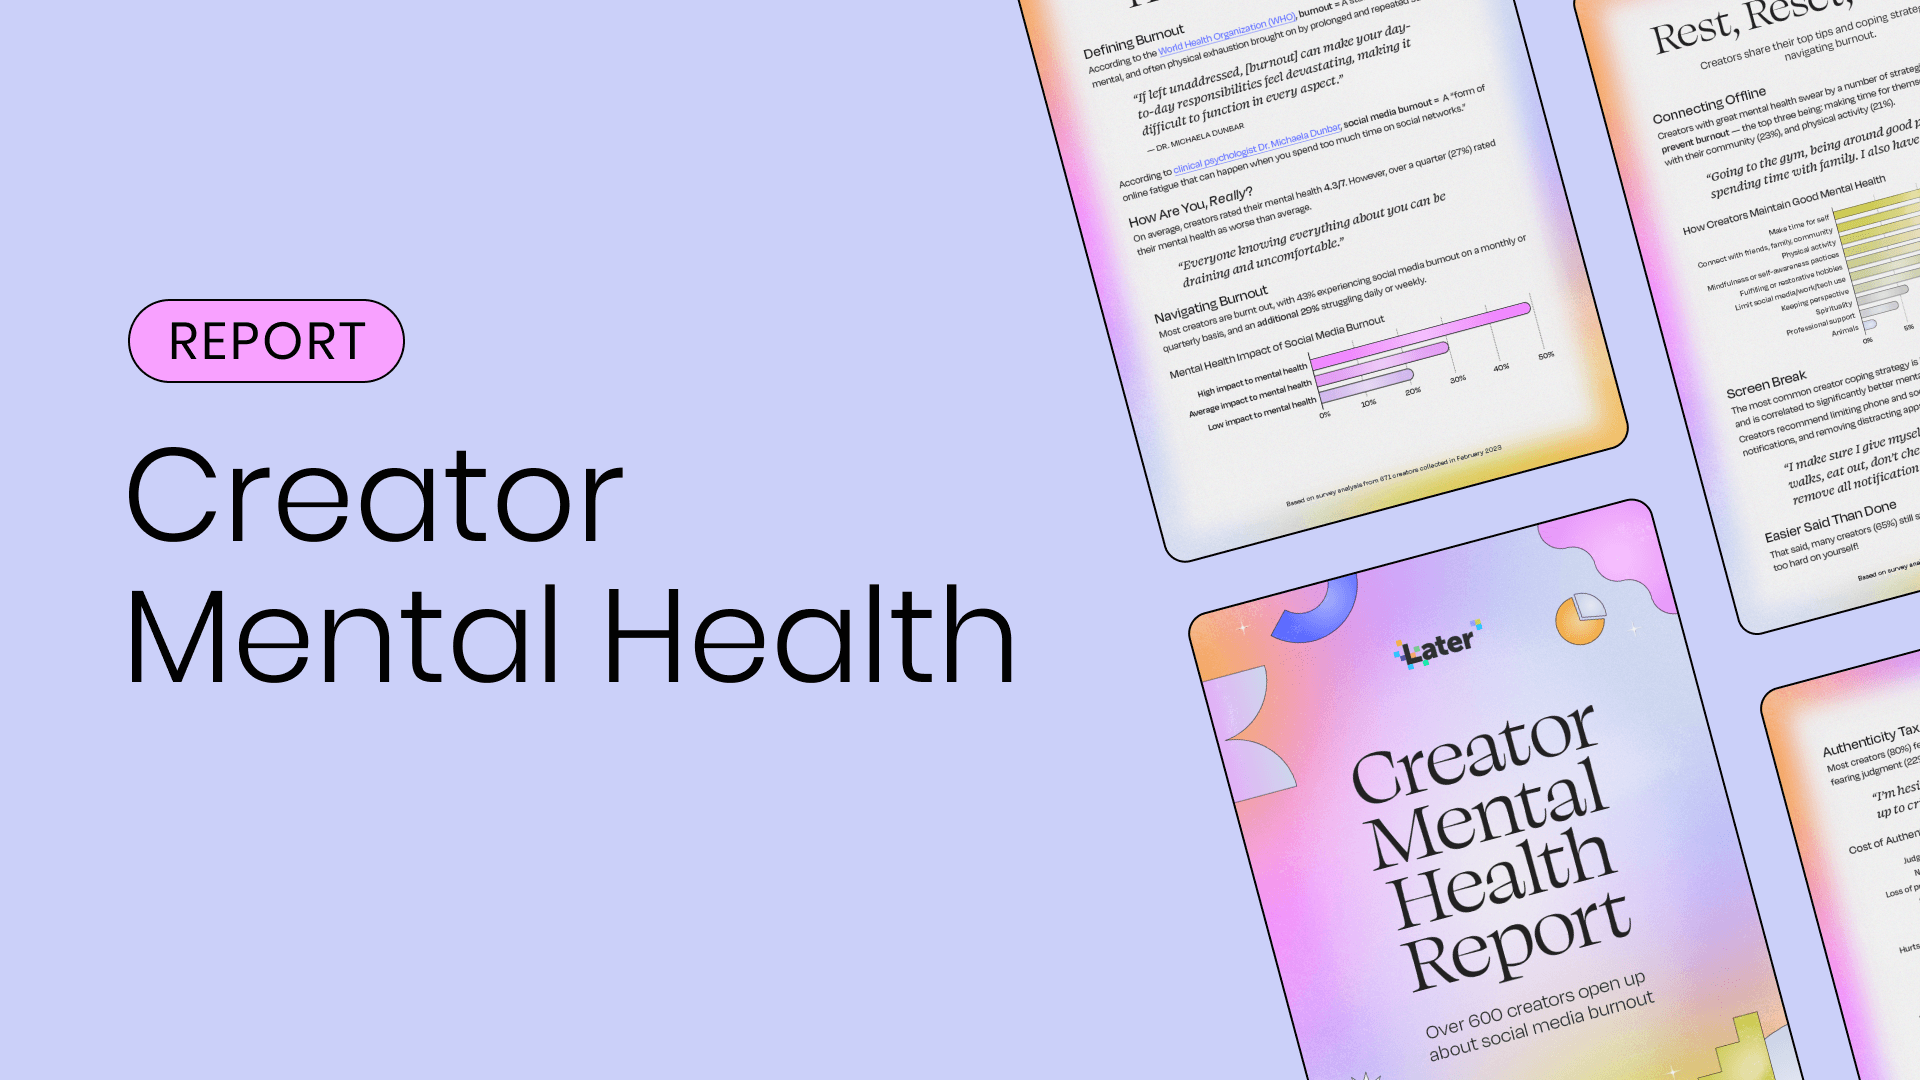 Thumbnail image showing the title “creator mental health report” beside sample pages of the report.